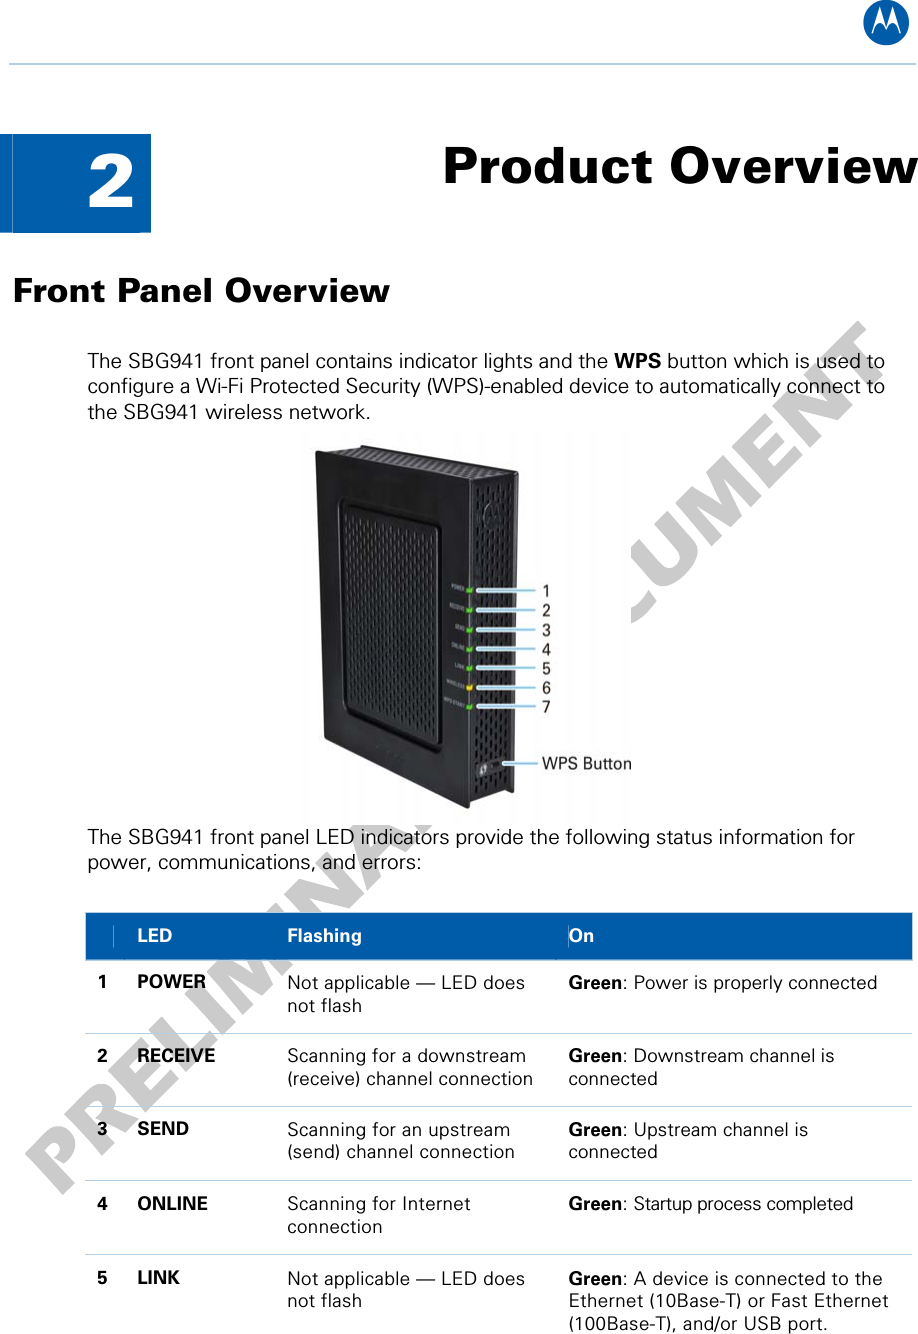 B  2  Product OverviewFront Panel Overview The SBG941 front panel contains indicator lights and the WPS button which is used to configure a Wi-Fi Protected Security (WPS)-enabled device to automatically connect to the SBG941 wireless network.  The SBG941 front panel LED indicators provide the following status information for power, communications, and errors:   LED  Flashing  On 1 POWER  Not applicable — LED does not flash Green: Power is properly connected 2 RECEIVE  Scanning for a downstream (receive) channel connection Green: Downstream channel is connected 3 SEND  Scanning for an upstream (send) channel connection Green: Upstream channel is connected 4 ONLINE  Scanning for Internet connection Green: Startup process completed 5 LINK  Not applicable — LED does not flash Green: A device is connected to the Ethernet (10Base-T) or Fast Ethernet (100Base-T), and/or USB port. 2 • Product Overview 7   